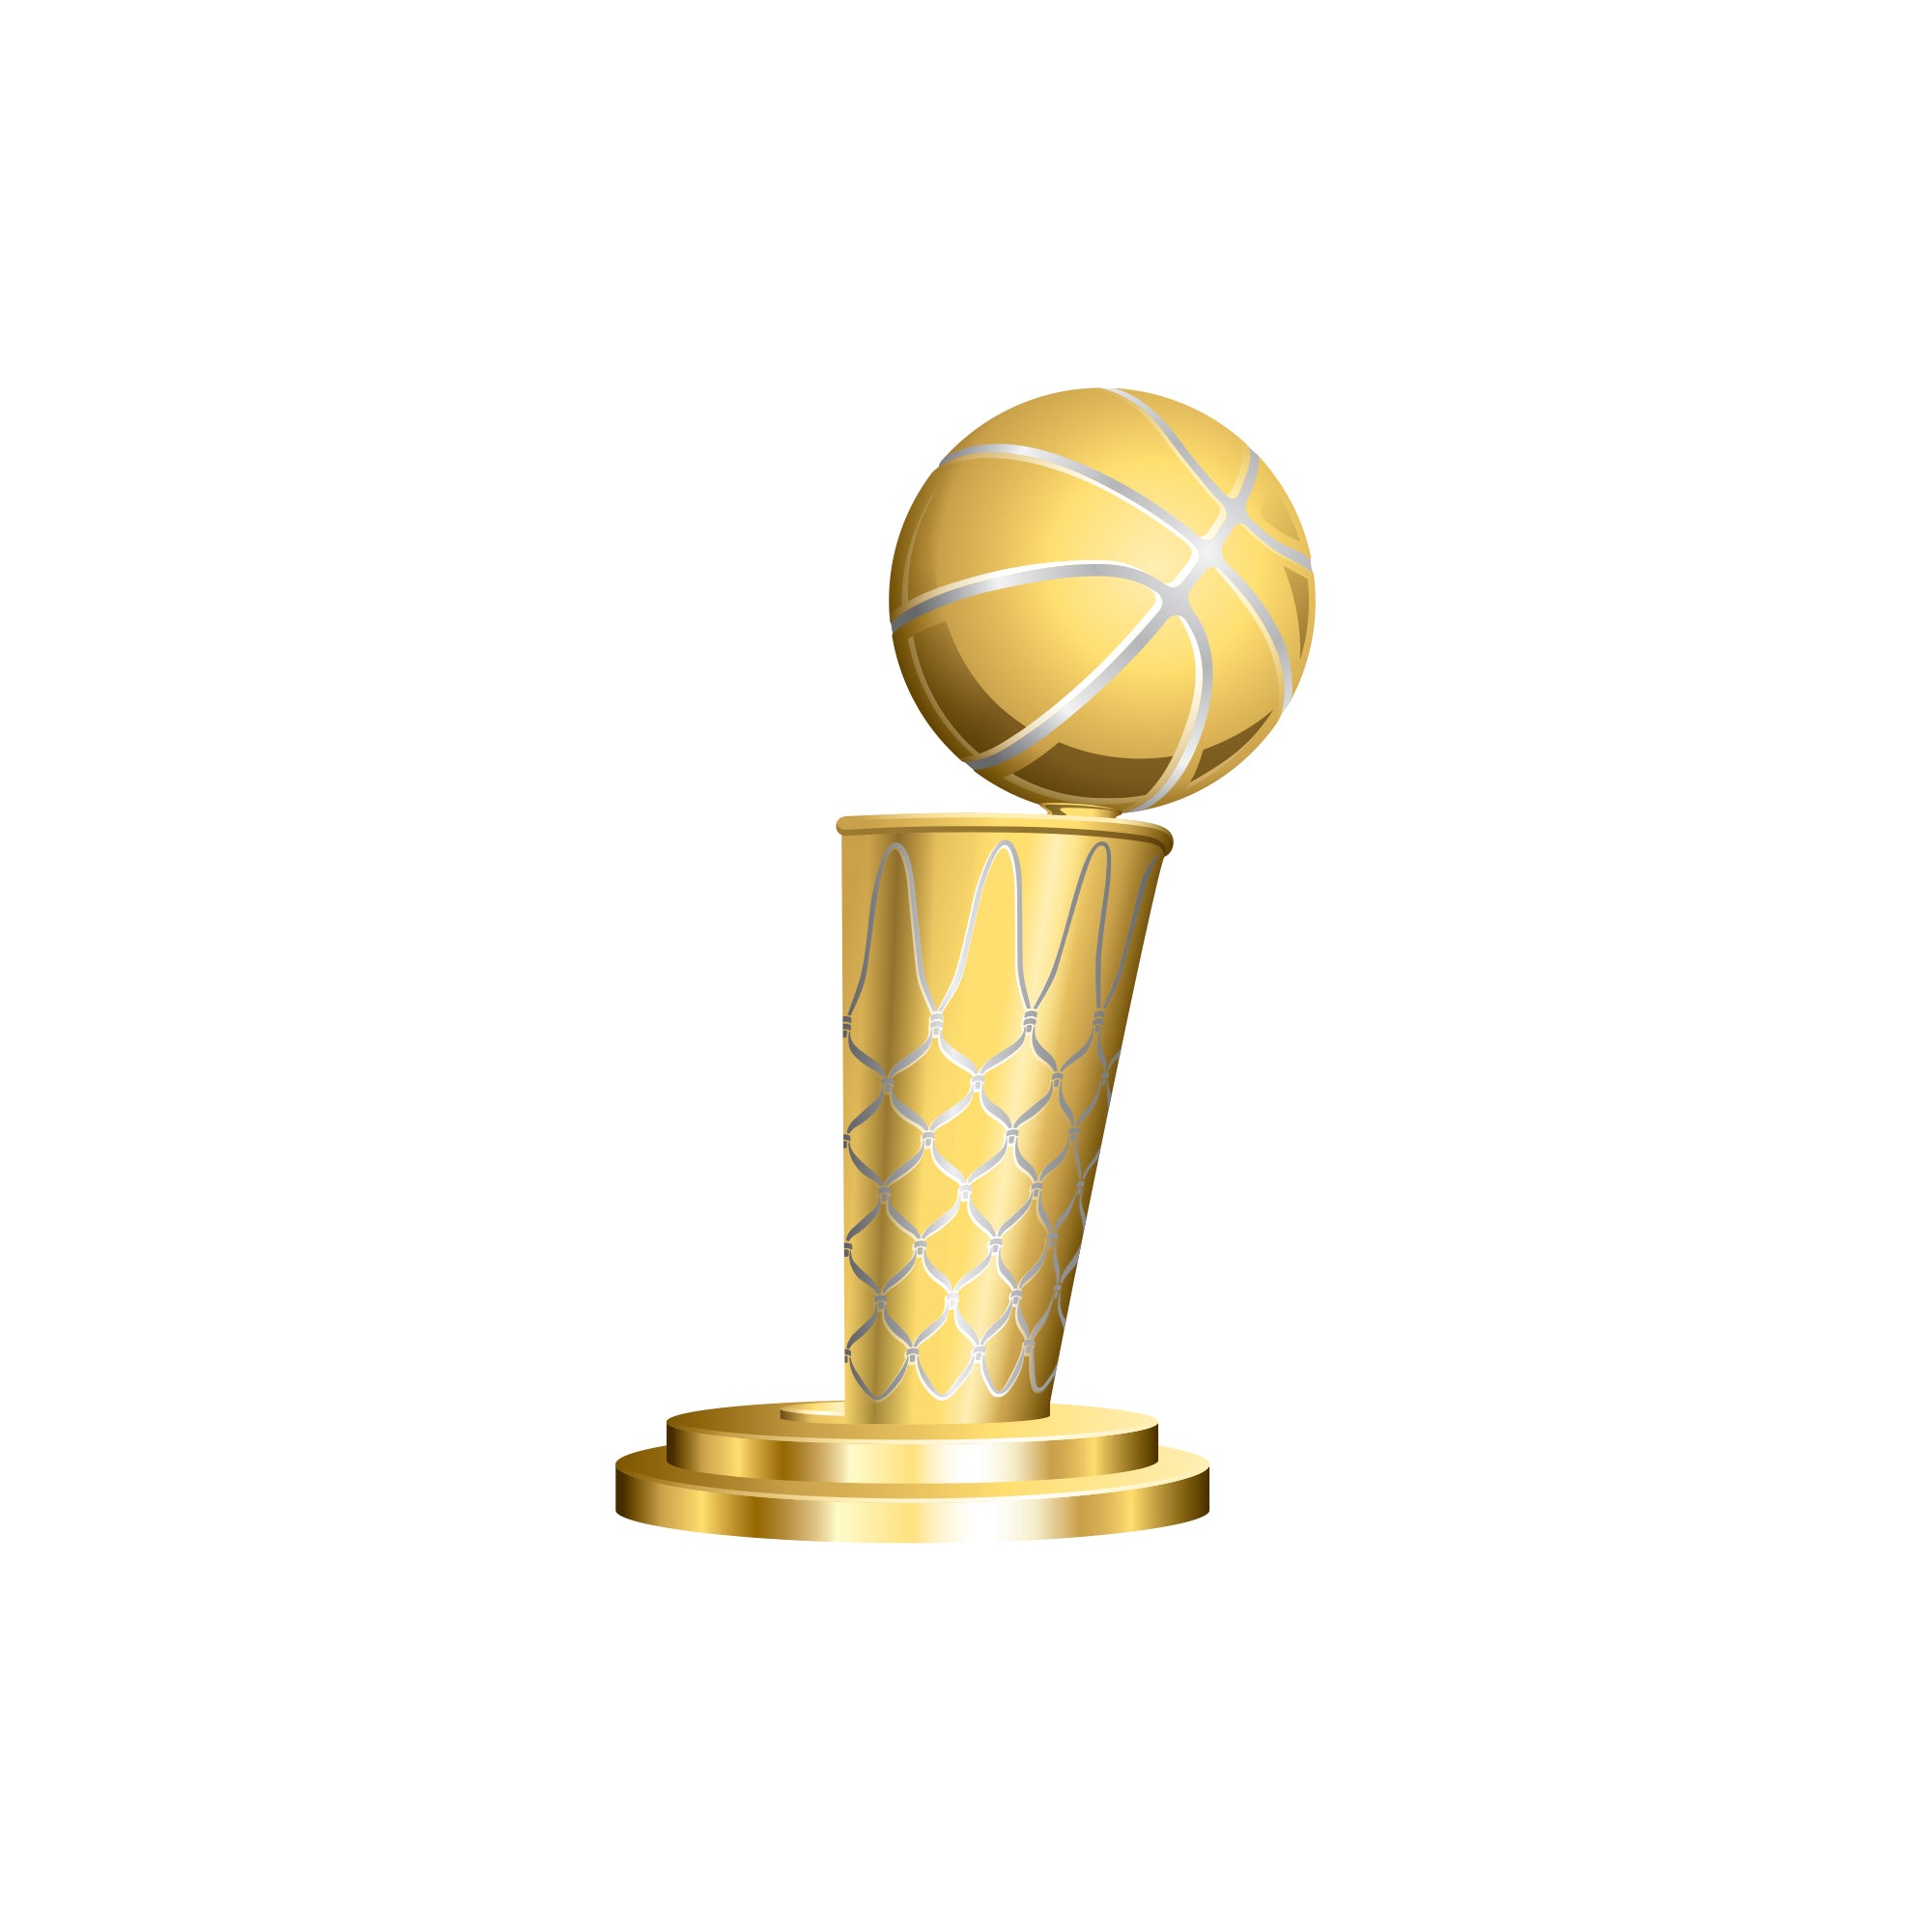 The Larry O'Brien Trophy  Basketball photography, Team wallpaper